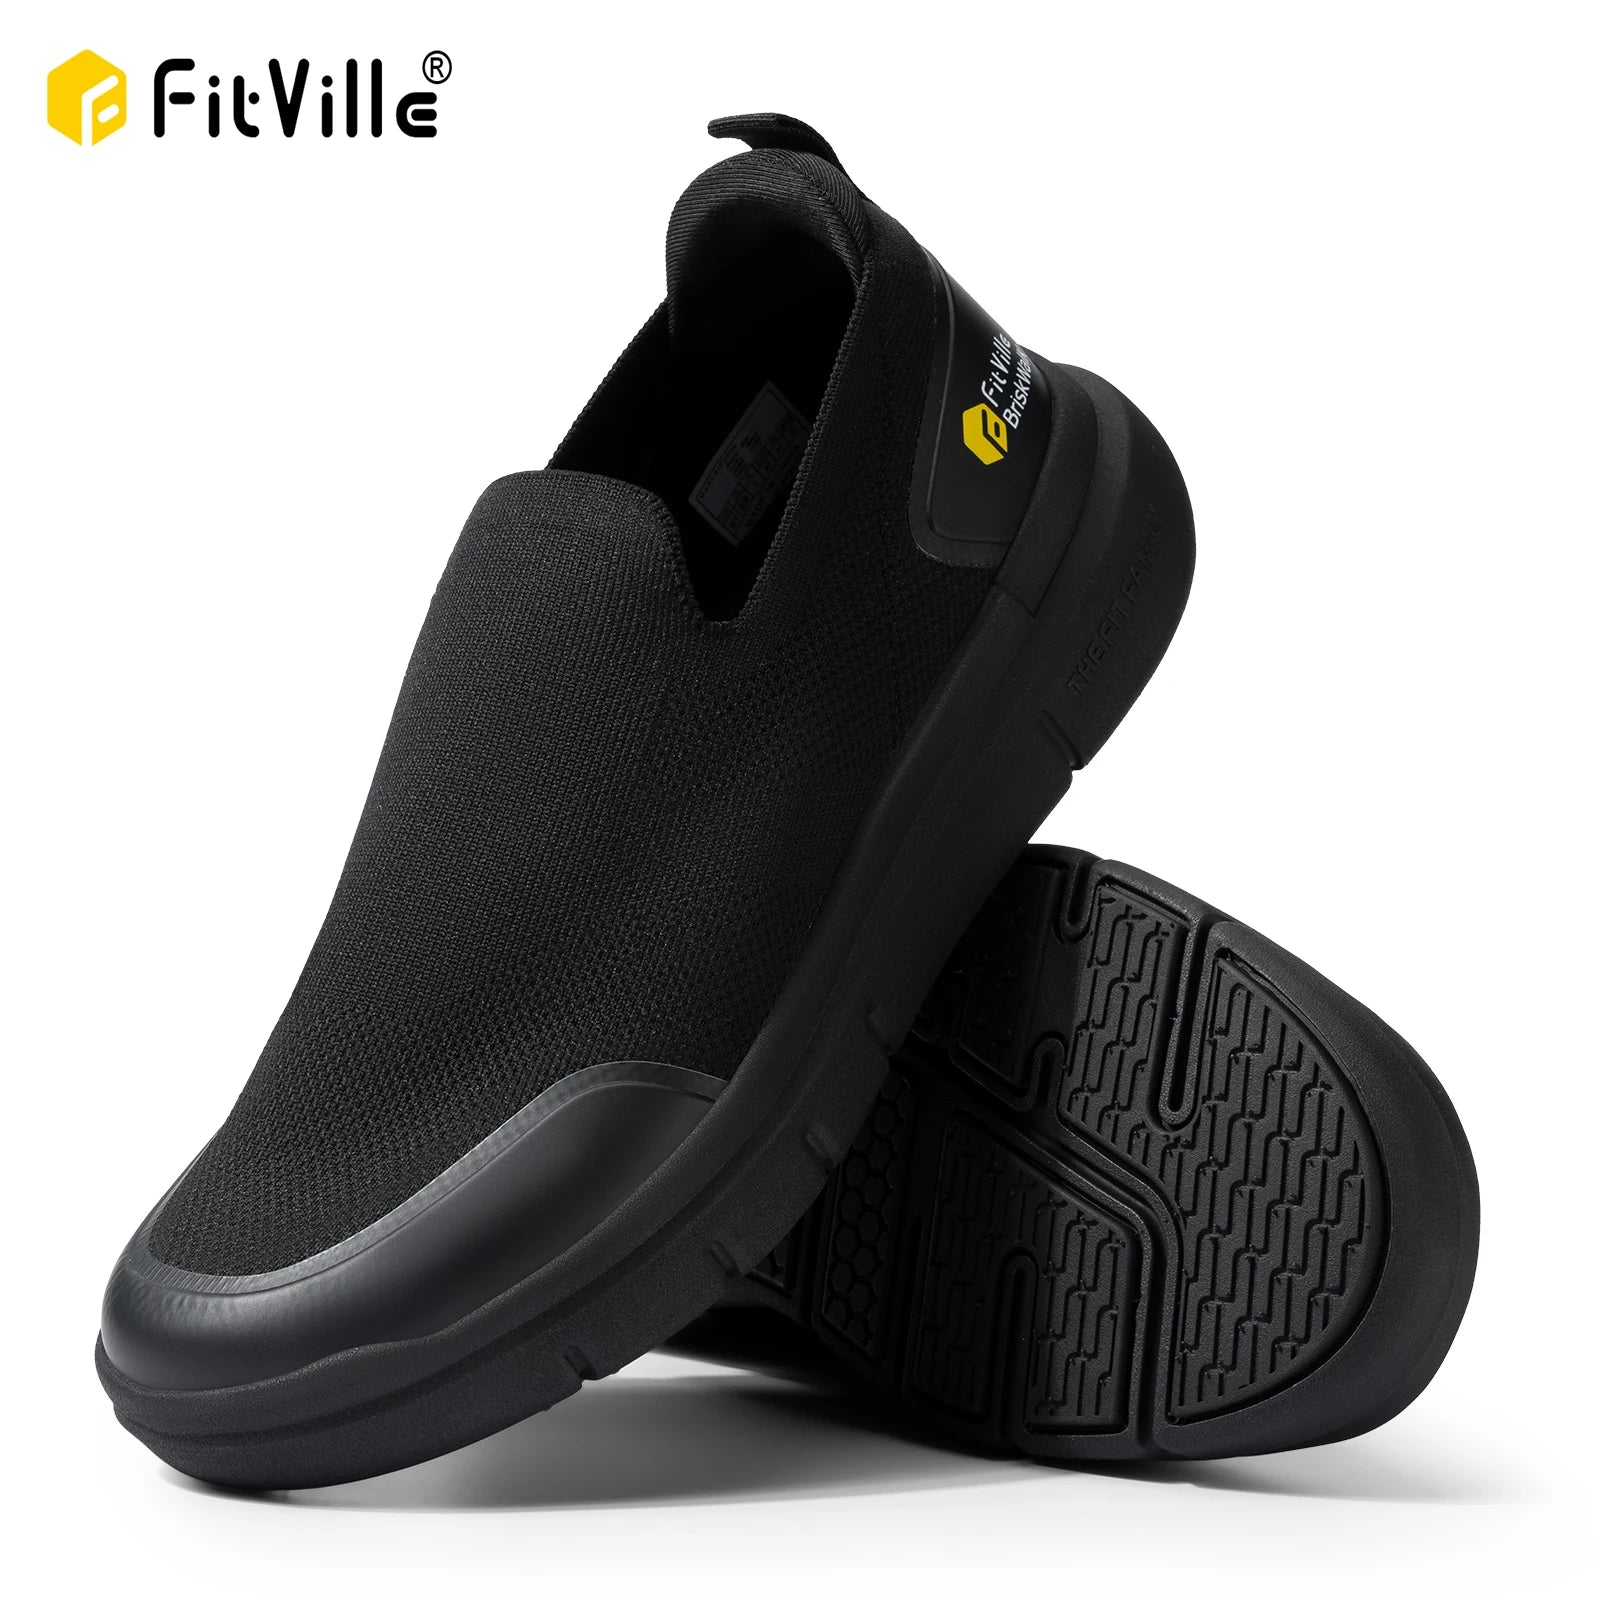 FitVille Men‘s Walking Shoes Extra Wide Plantar Fasciitis Shoes Lightweight for Swollen Feet Orthopedic Foot Pain Relief